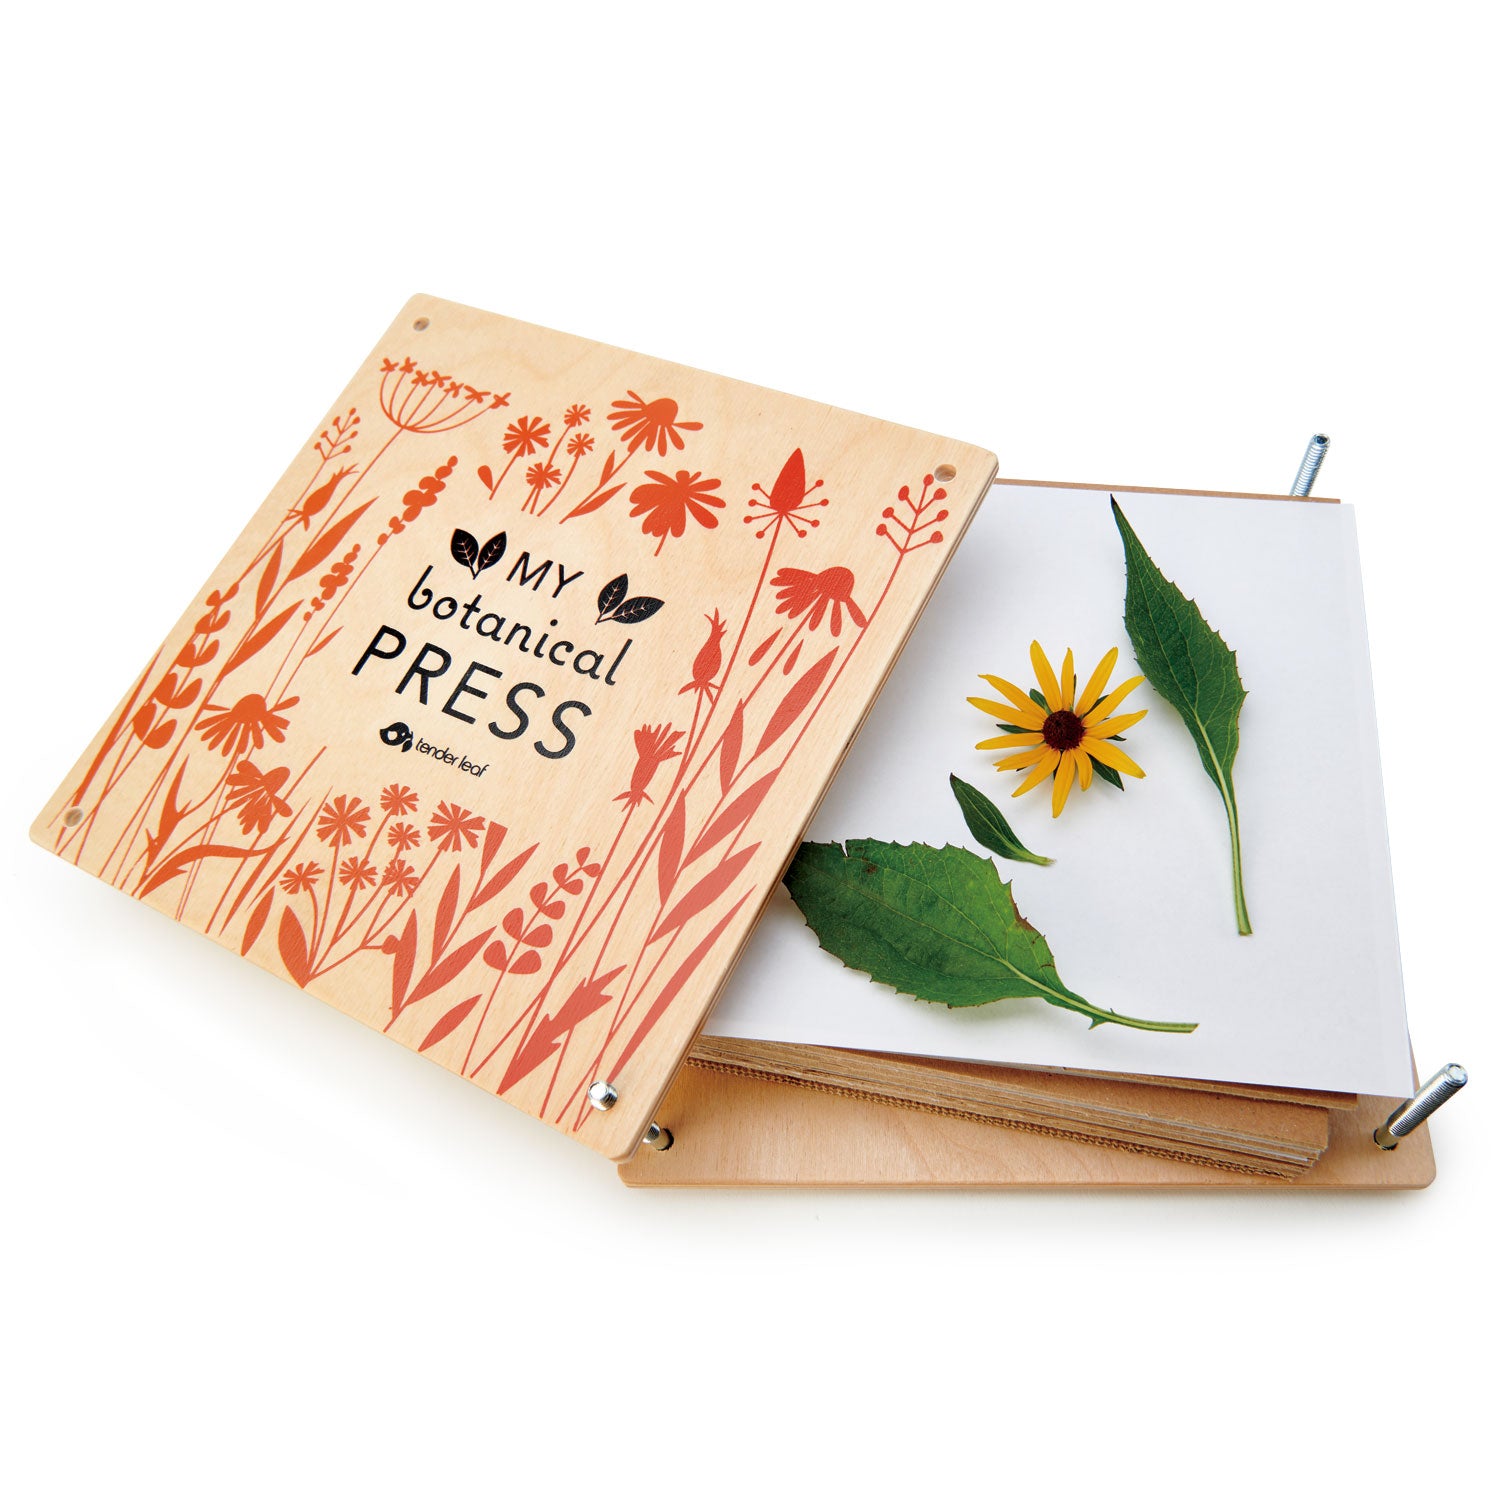 Natures Pressed Flower & Leaf Press 7 x 9 Nature Press (FOR Pressing Leaves & Flowers)